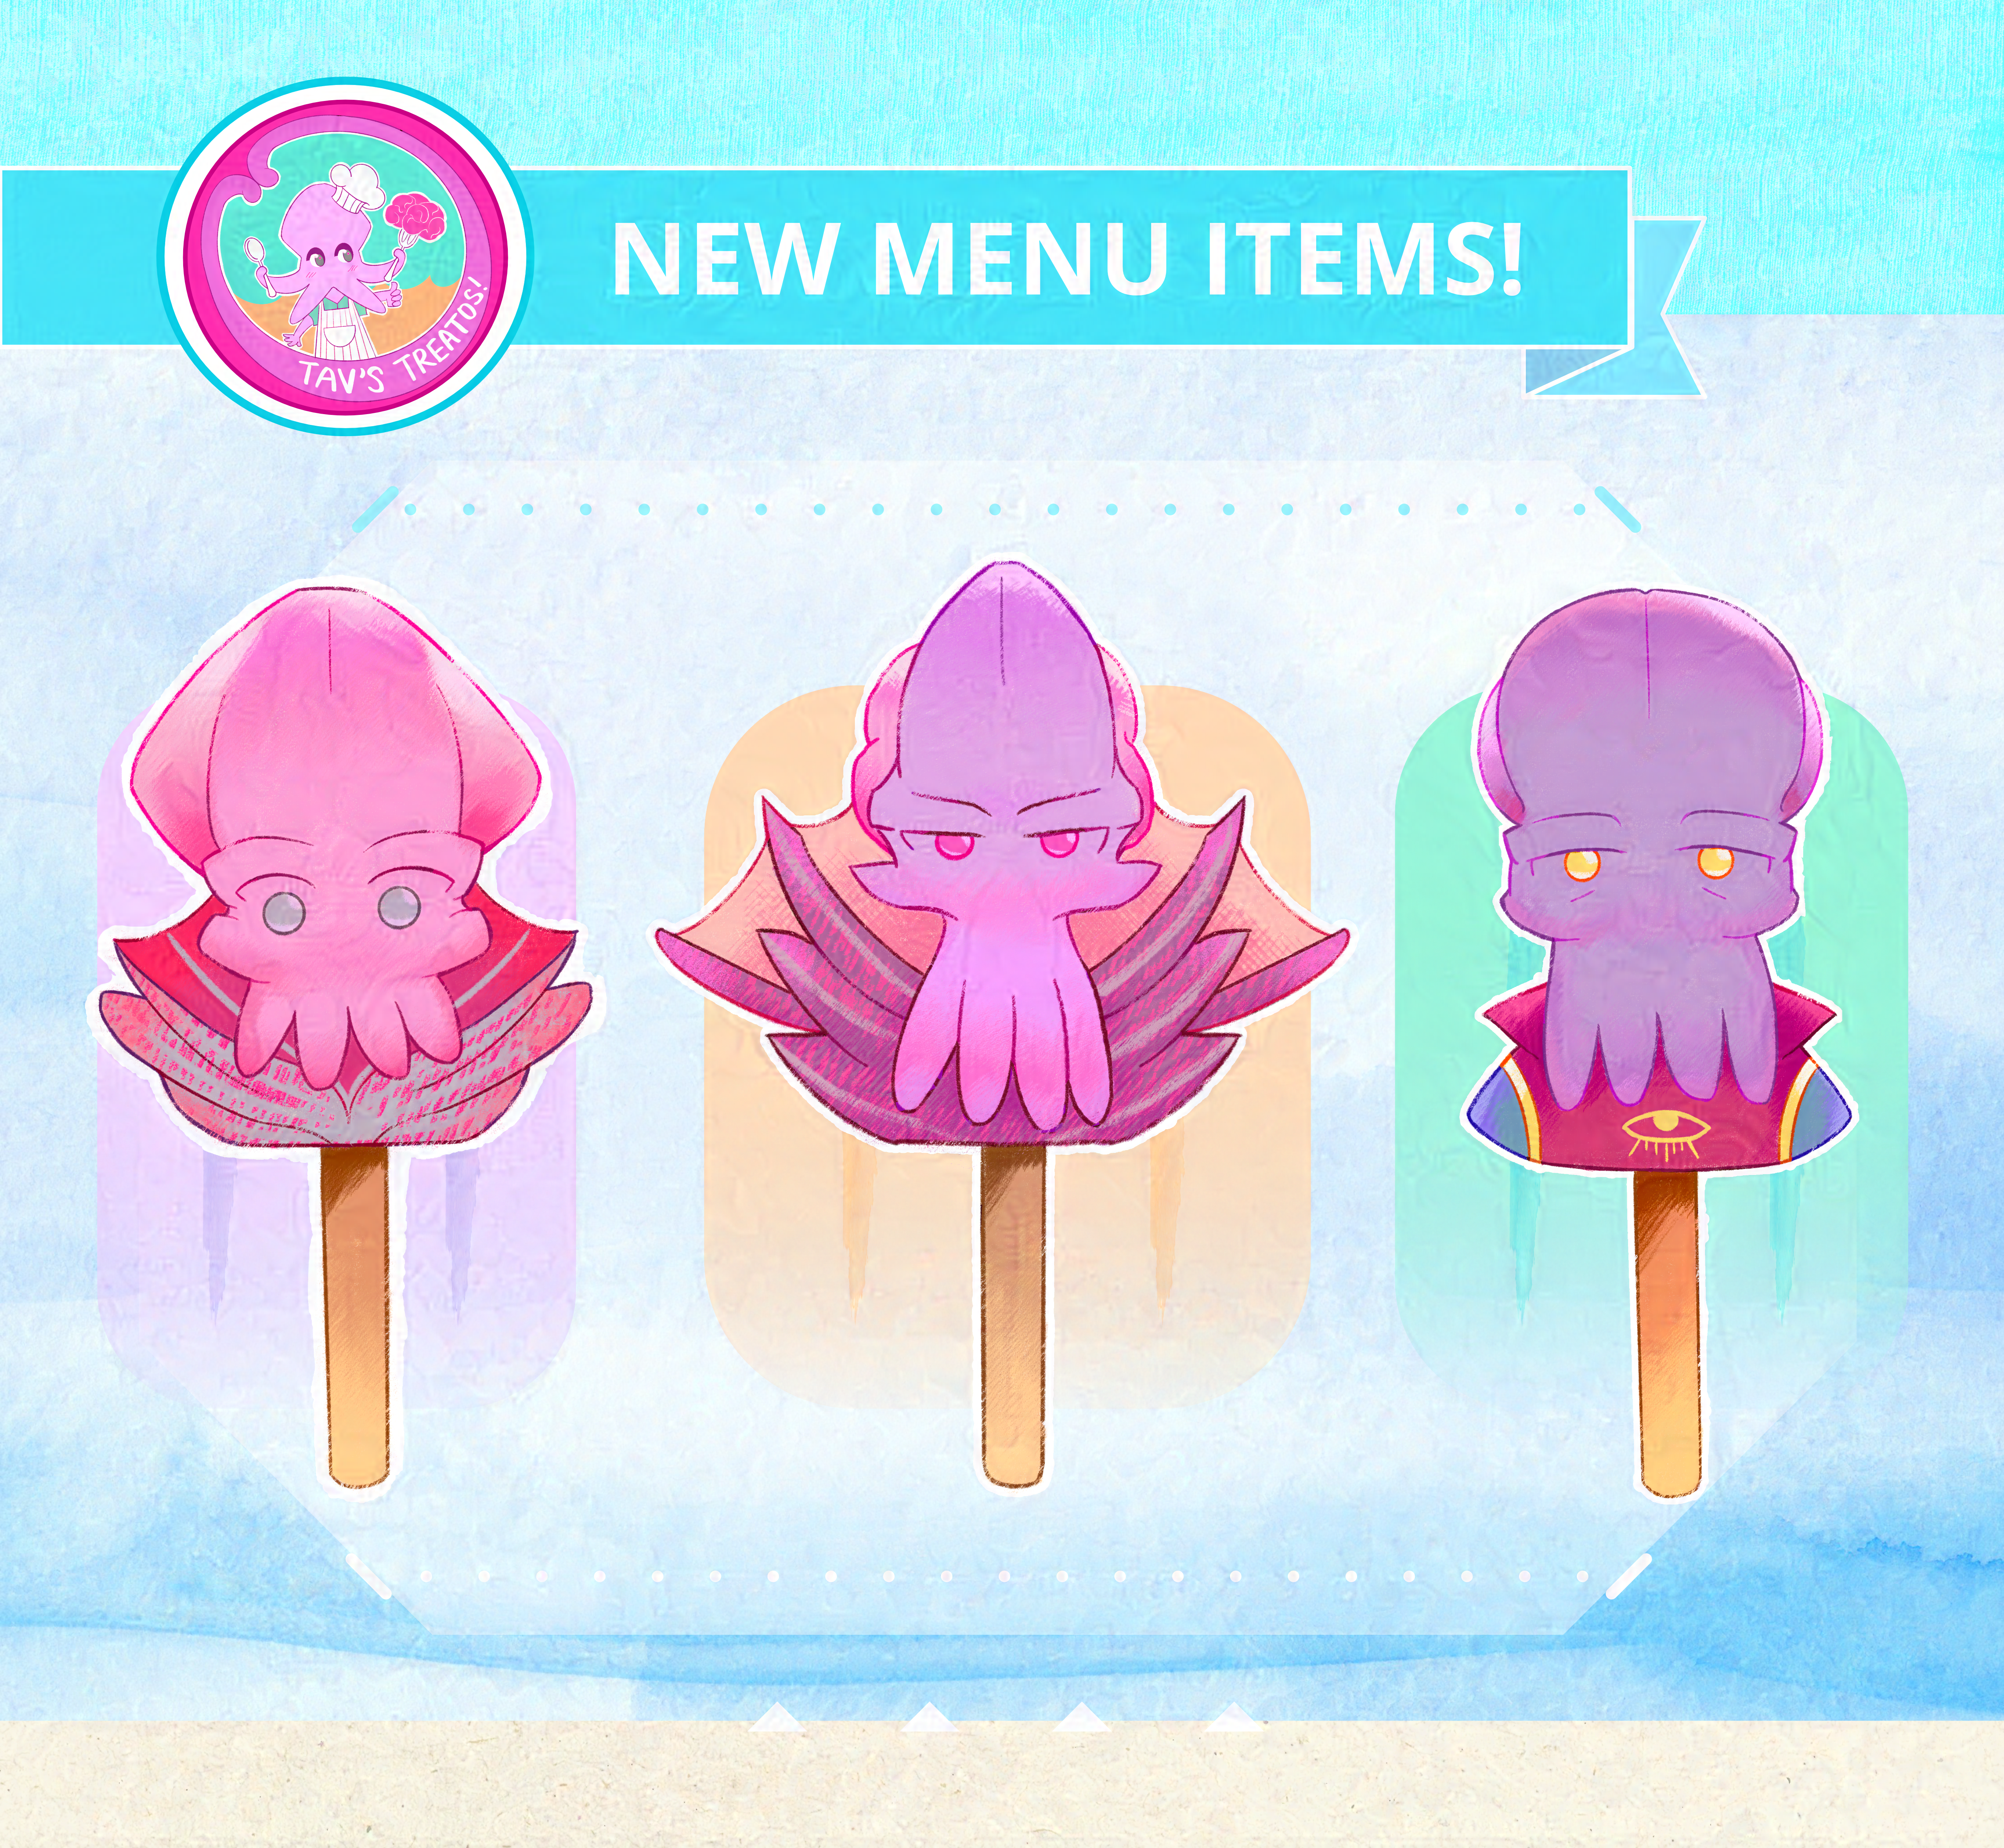 Three mindflayer character popsicles featuring Tav (Illithid version), the Emperor, and Omeluum are shown on a blue watercolour background. The logo 'Tav's Treatos' is on top, with the headline: 'New menu items!'. Tav and the Emperor look like simplified squids, and Omeluum is more octopus coded.